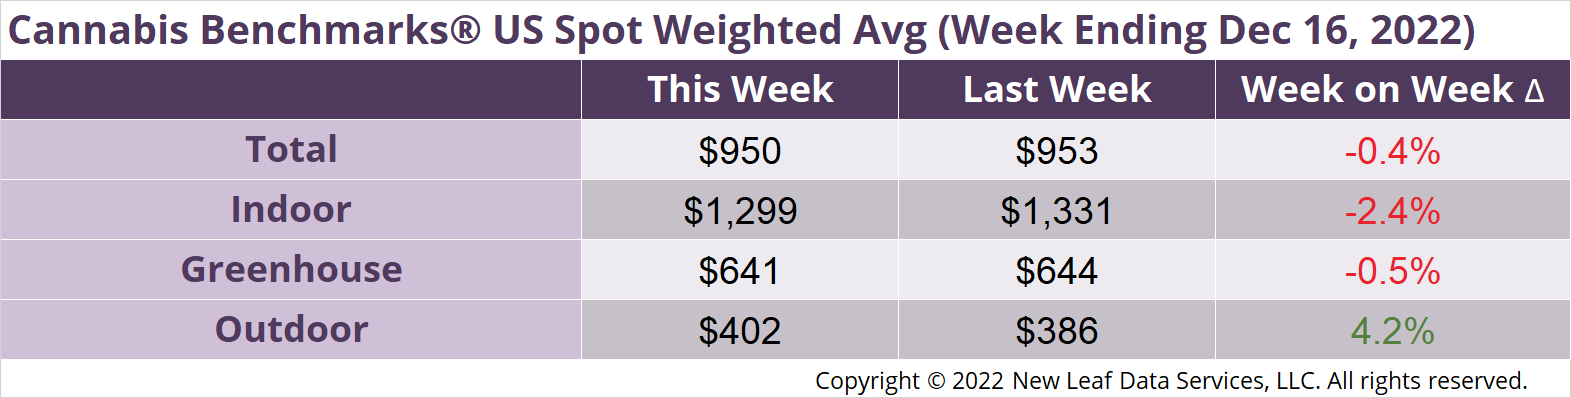 Cannabis Benchmarks U.S. Spot Weighted Average Prices December 16, 2022